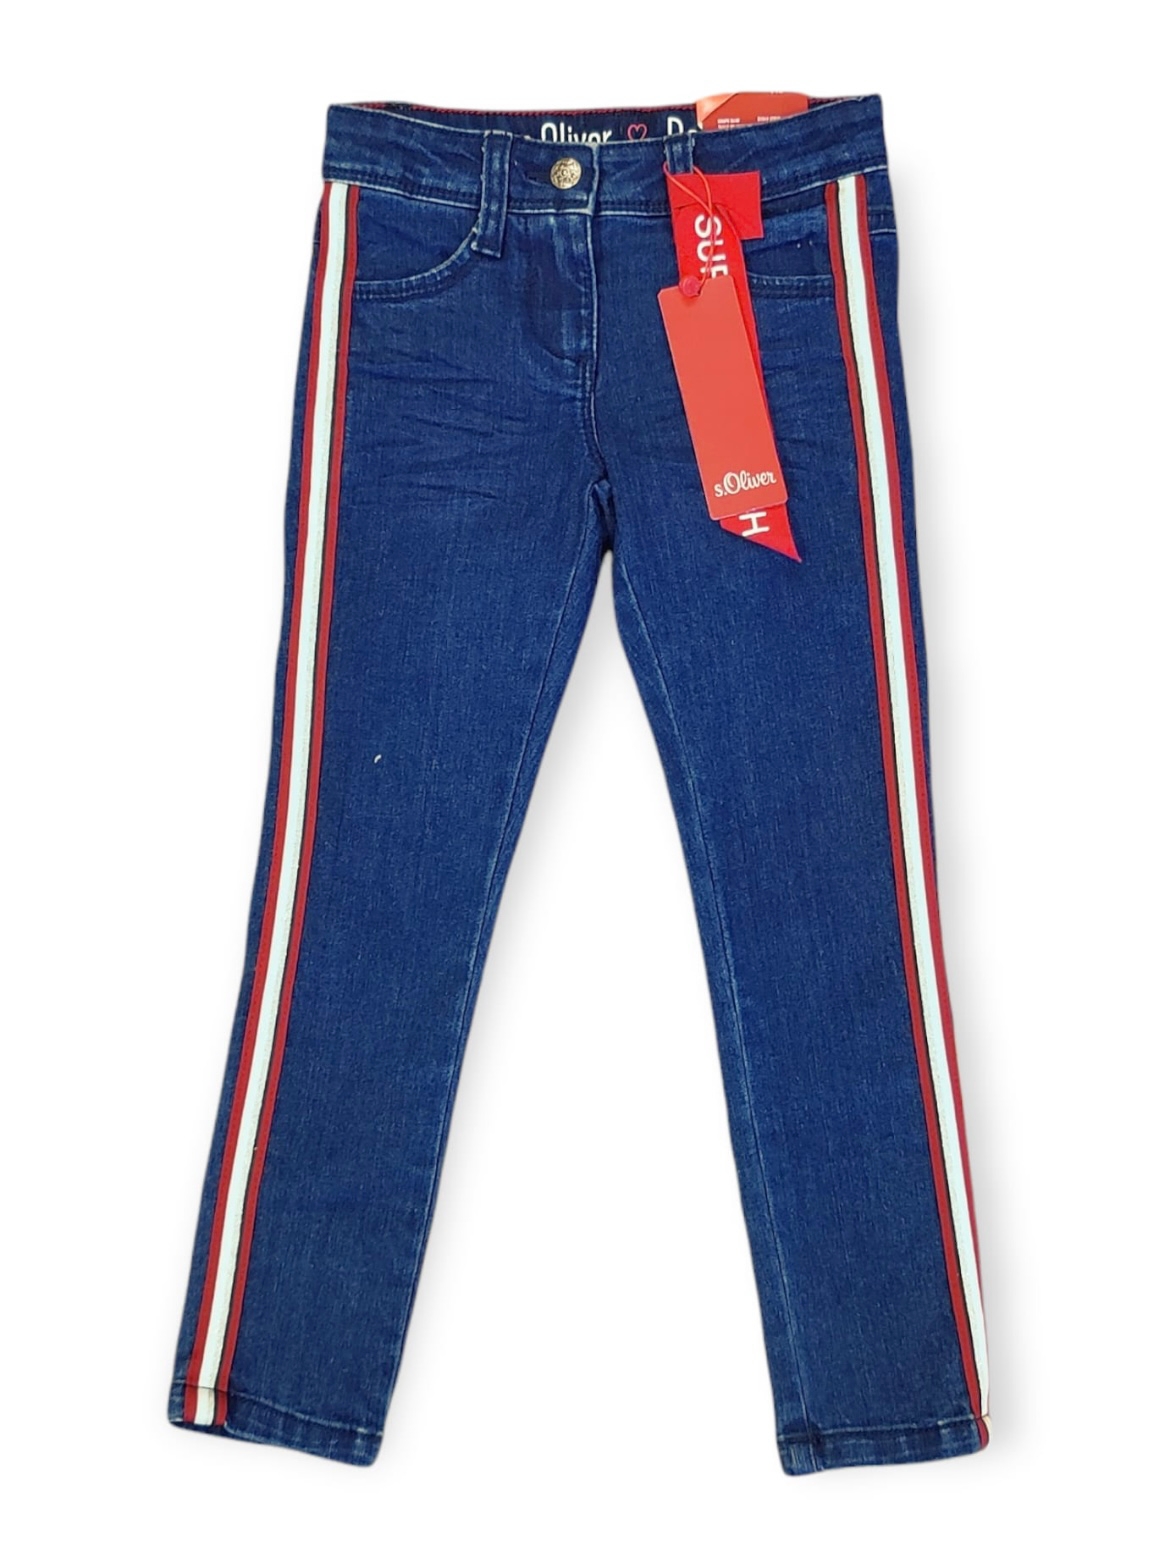 S. Oliver Stretch Jeans